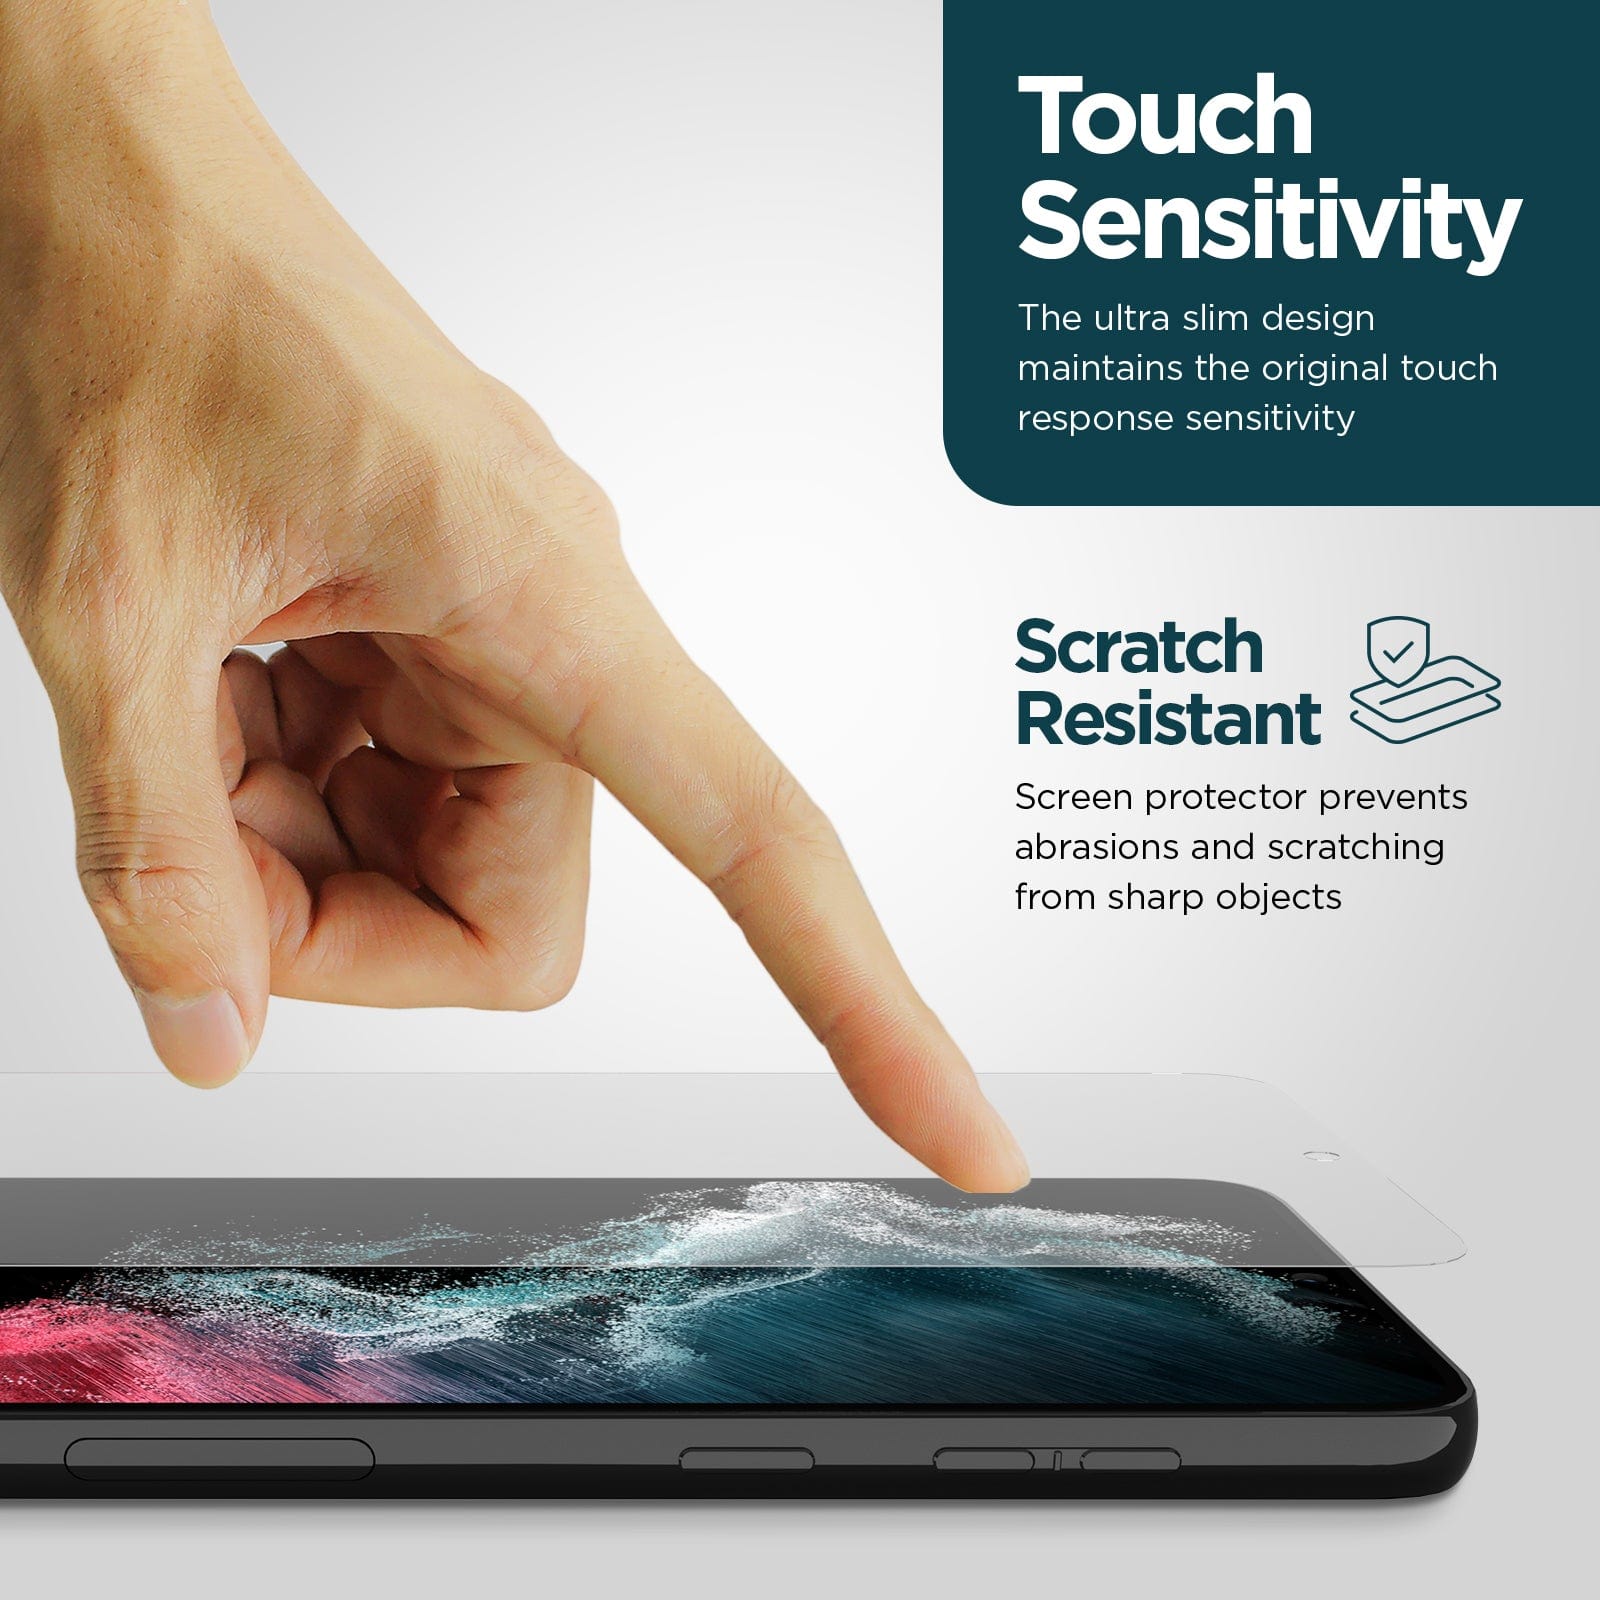 ULTRA HIGH CLARITY. KEEP YOUR PICTURE CRYSTAL CLEAR AND YOUR COLORS TRUE. ANTI-FINGERPRINT TECHNOLOGY THAT KEEPS YOUR SCREEN FROM SMUDGING. FLEXISHIELD.